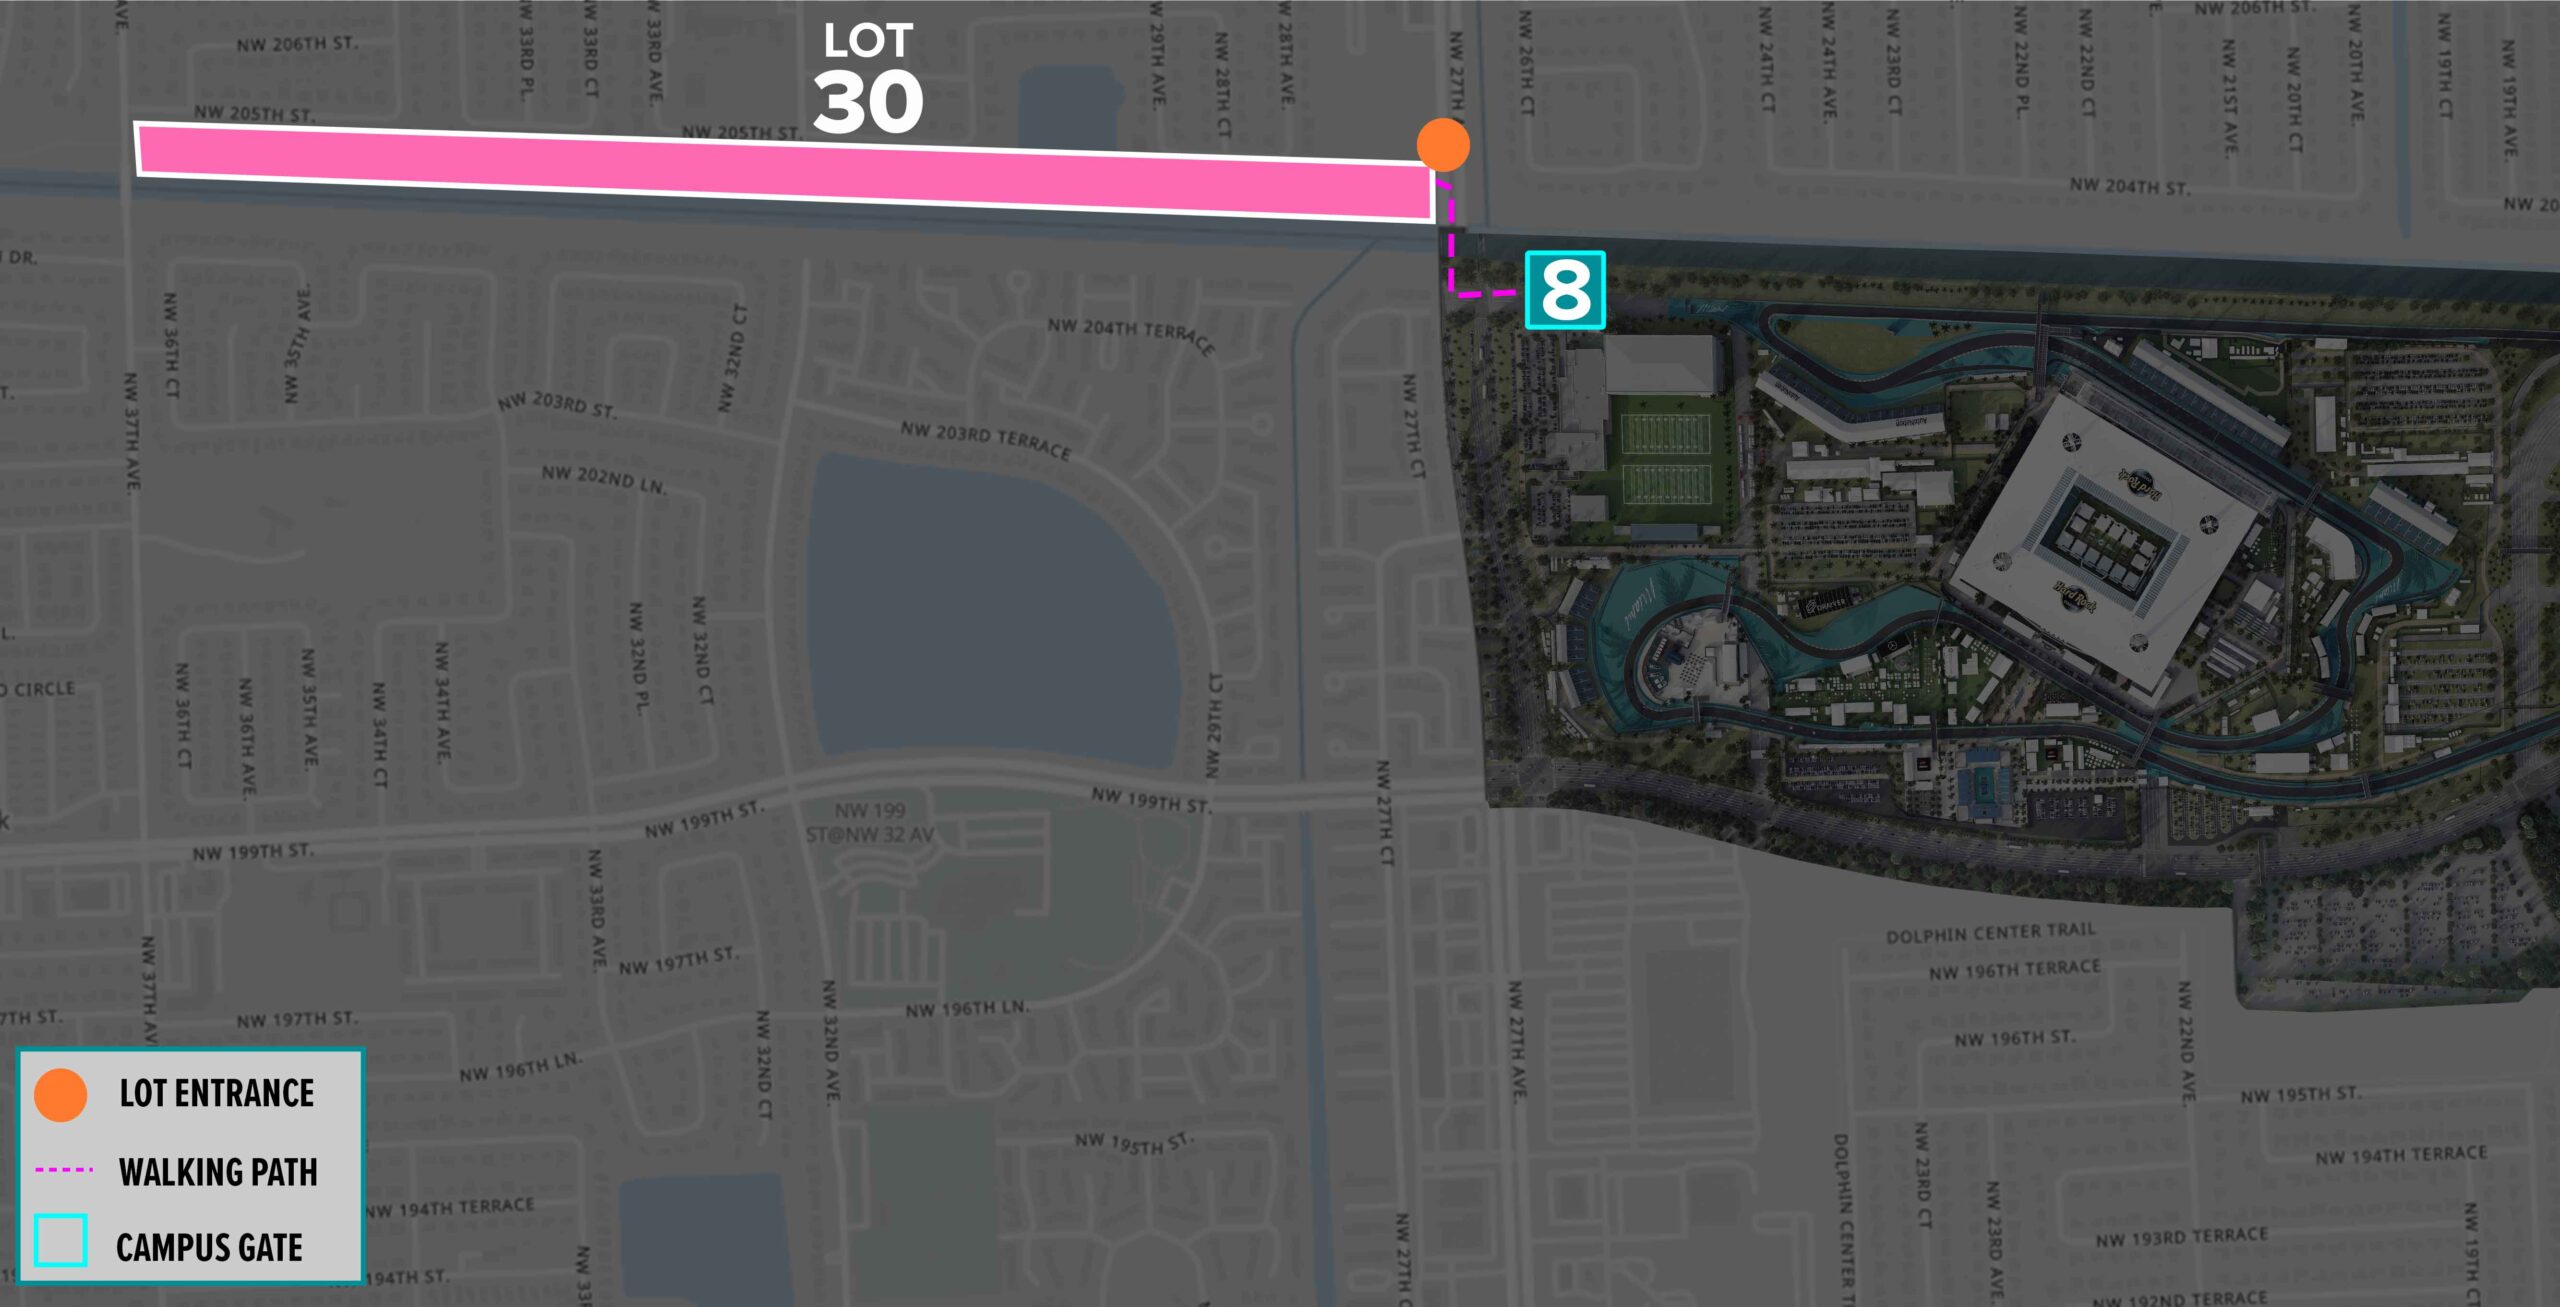 Parking Lot Location Map for Pink Lot 30 at the Formula 1 Crypto.com Miami Grand Prix